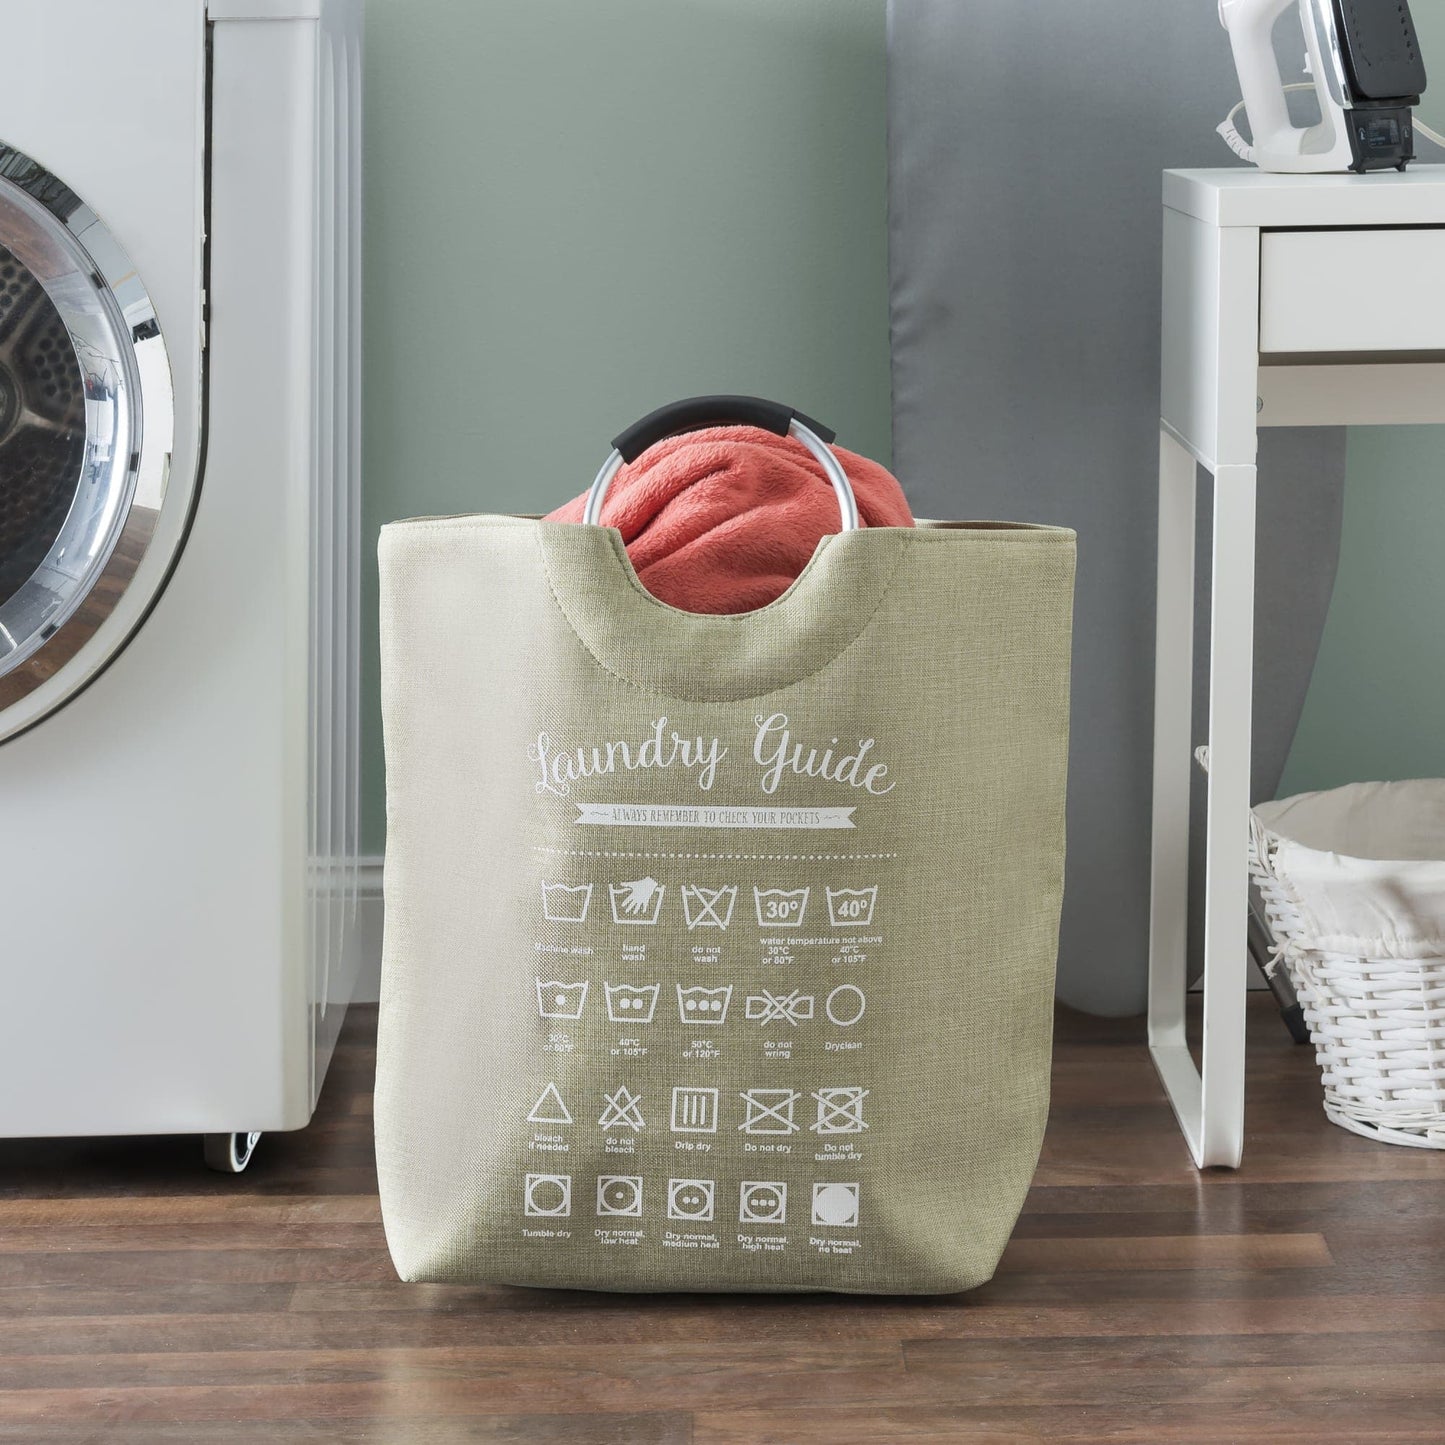 Laundry Guide Canvas Hamper Tote with Soft Grip Handles, Green